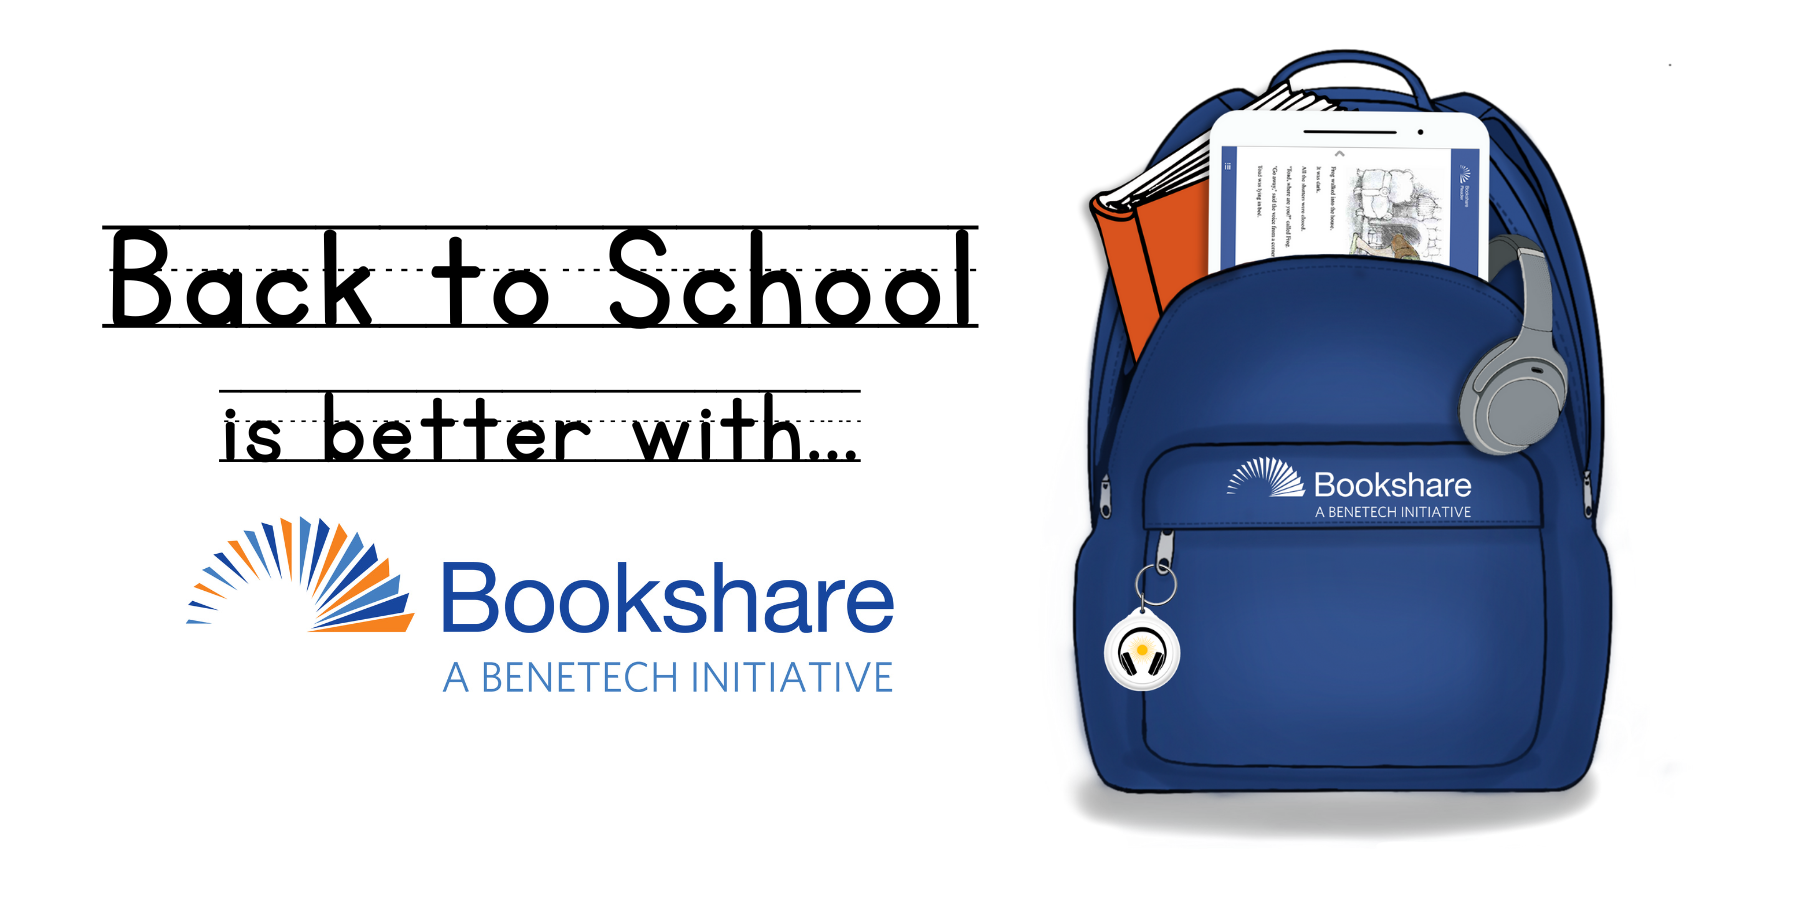 Back to school is better with Bookshare. A blue backpack with a tablet sticking out appears on the right.